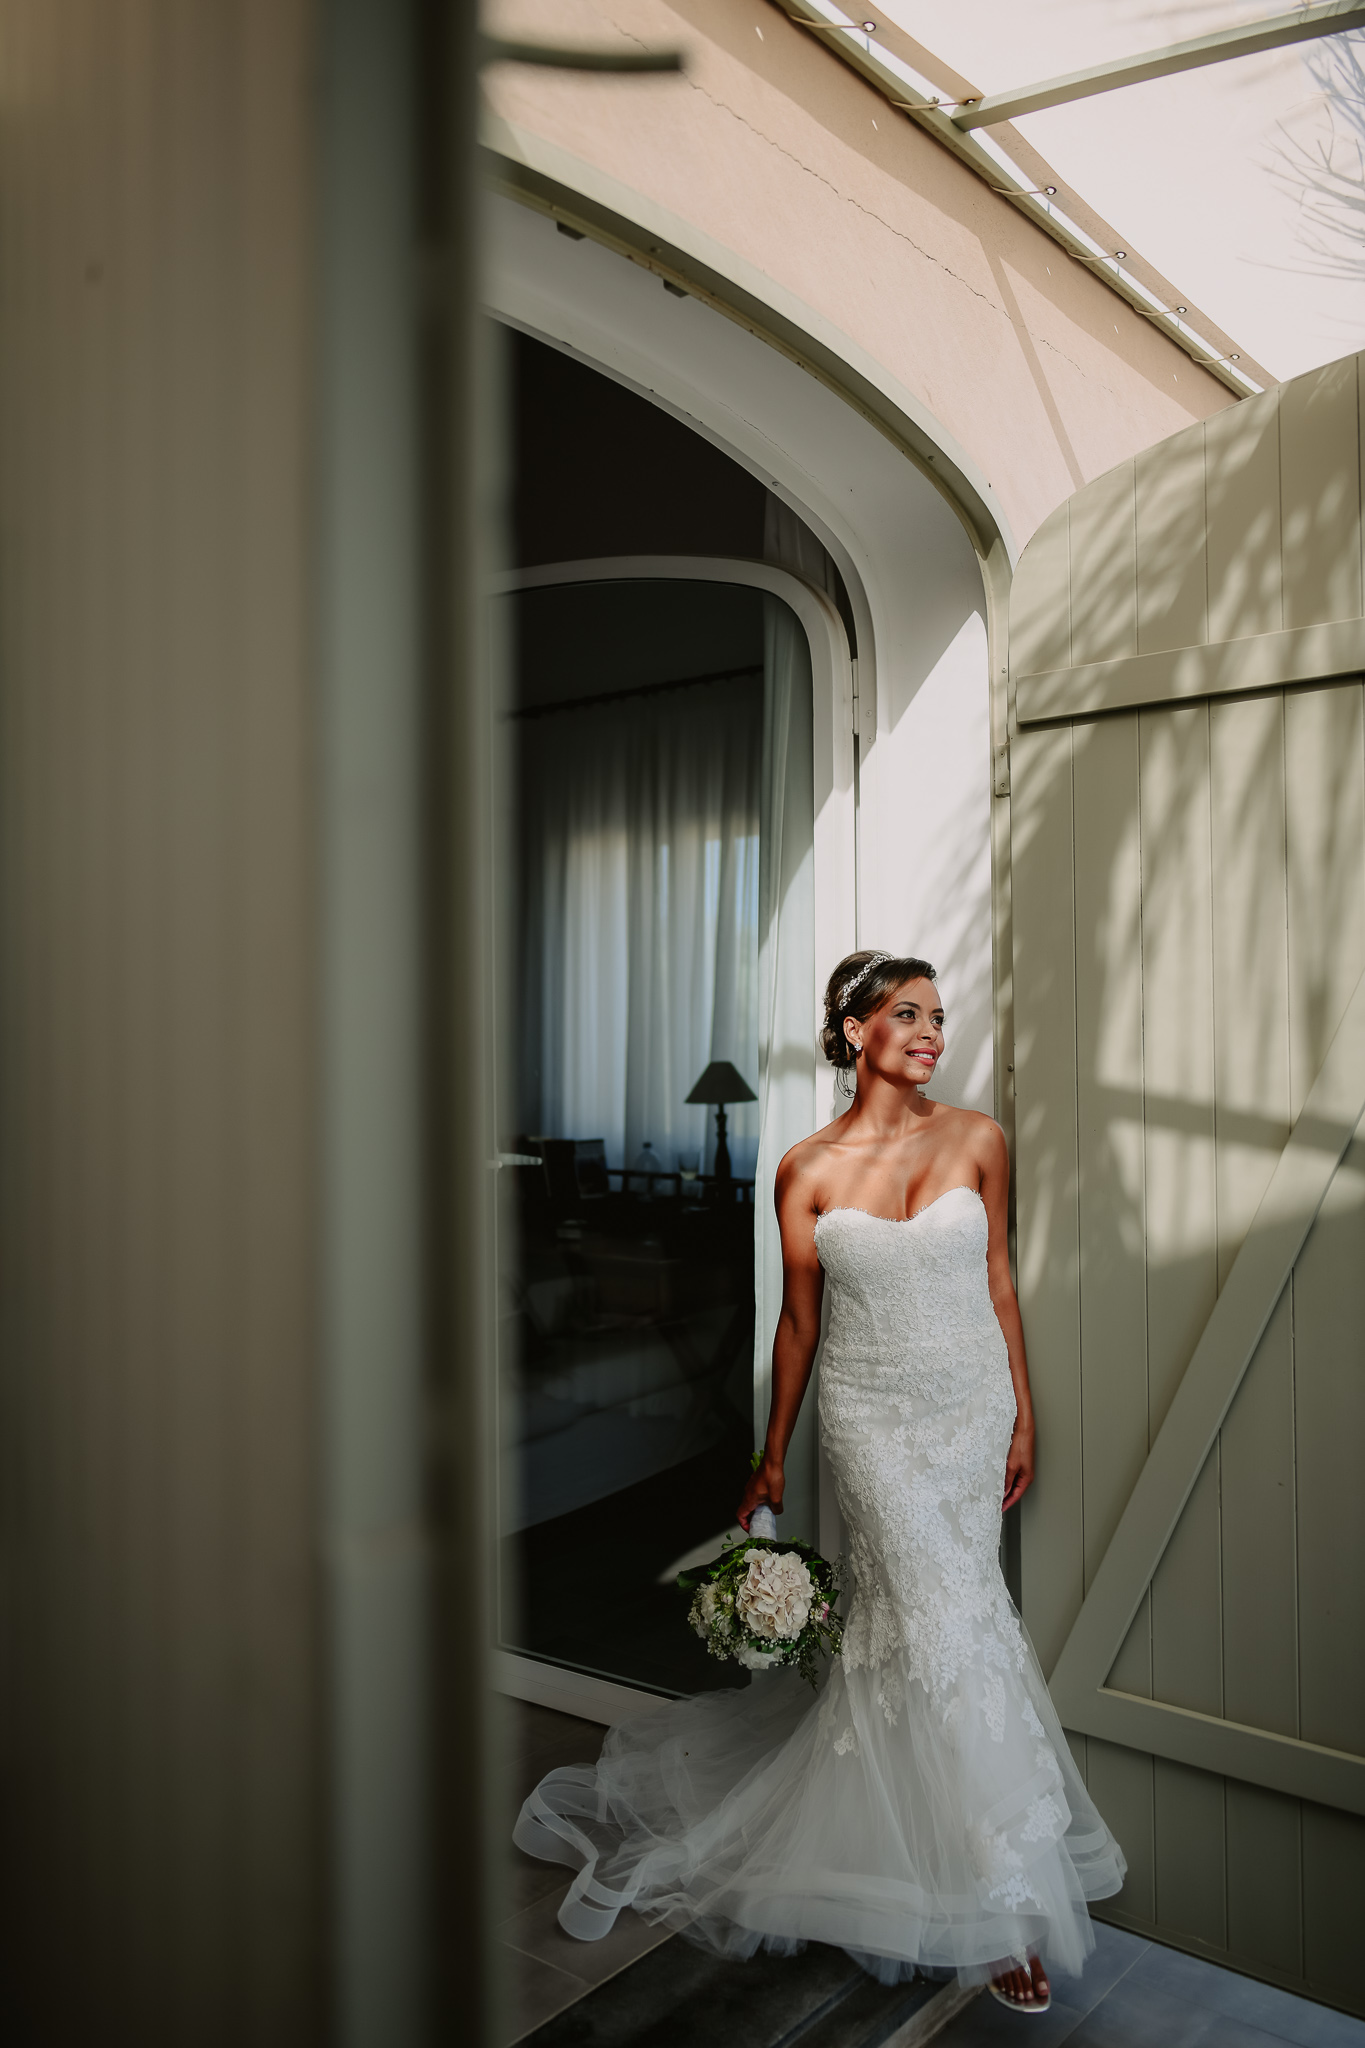 D850-field-test-real-world-review-wedding-sicily-6